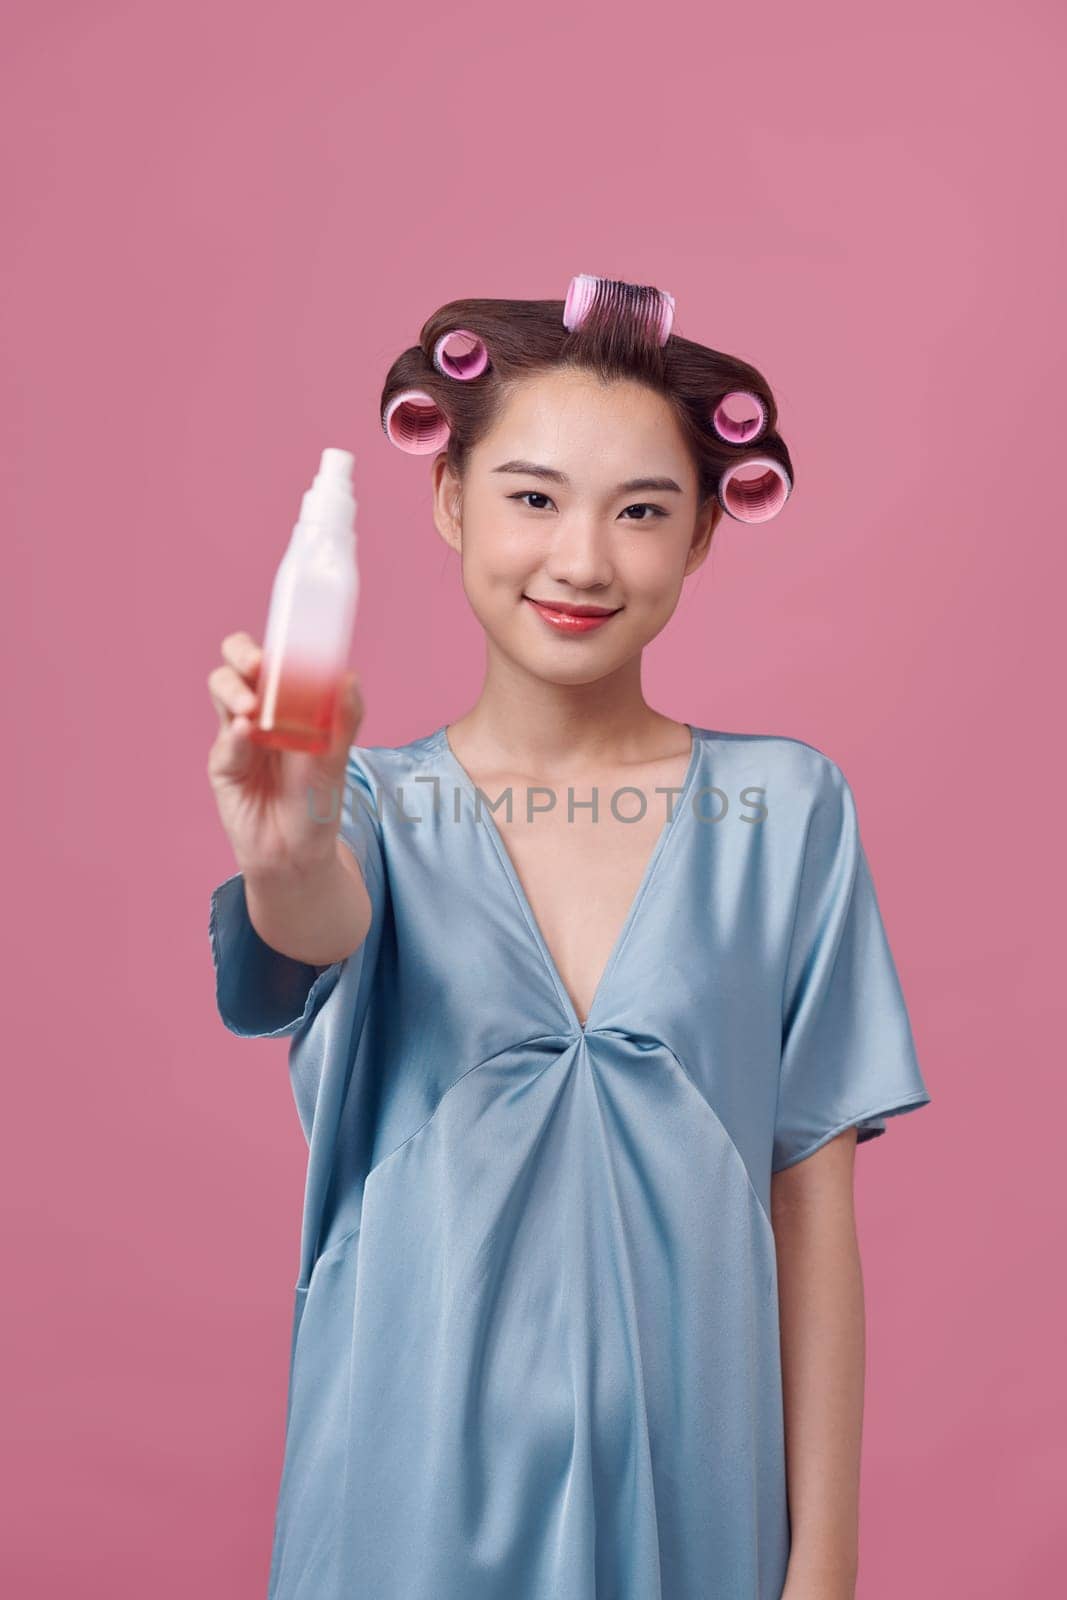 Beautiful young woman holding a bottle in her hand with curlers on her hair